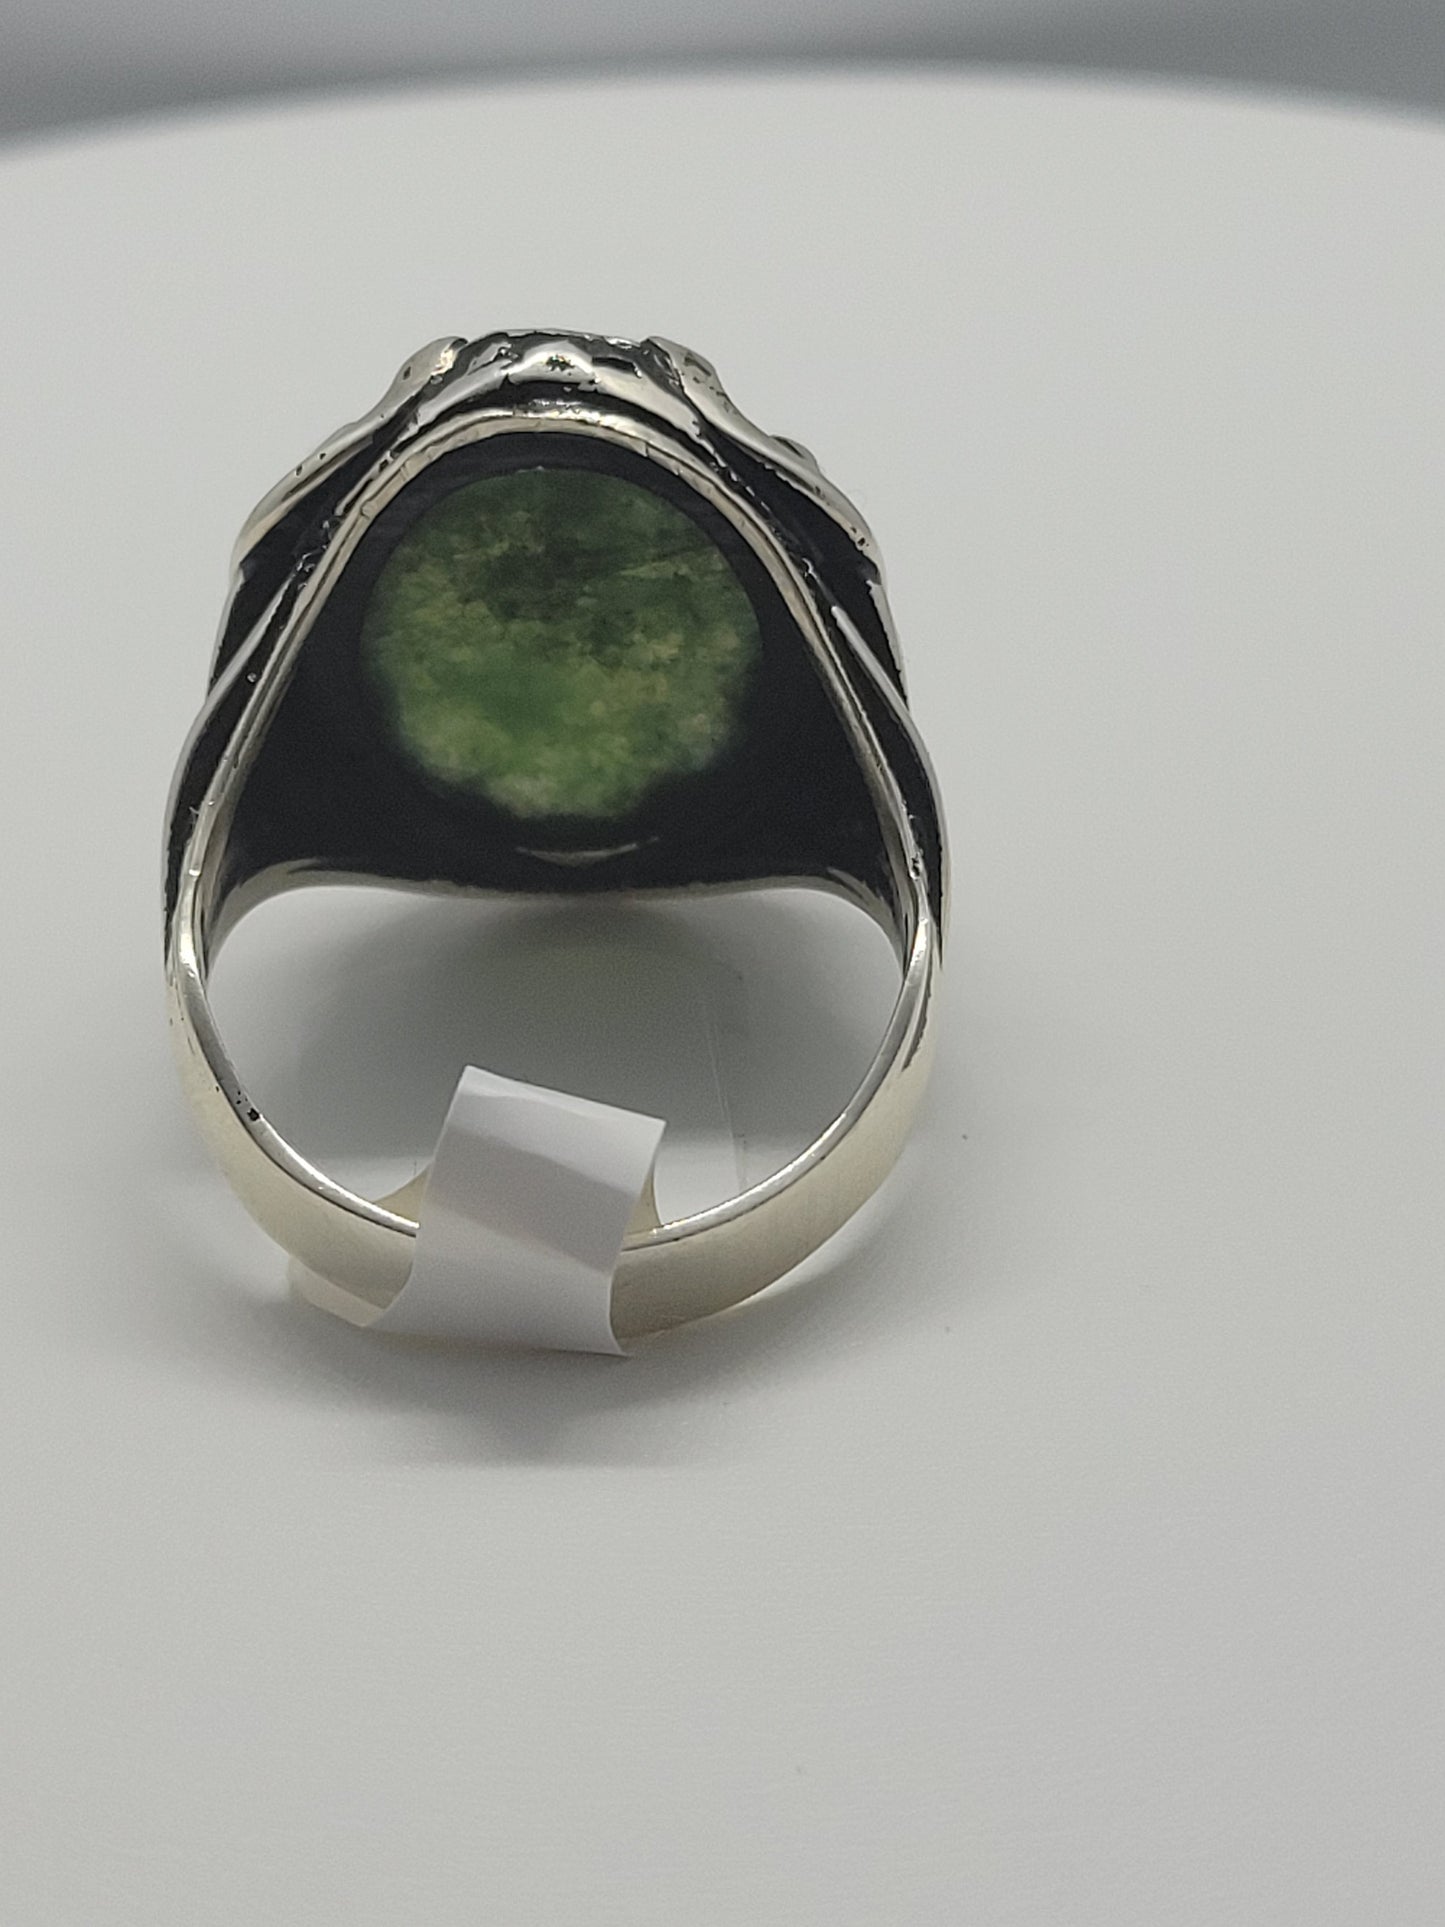 Vintage Chrysoprase Mens Ring in 925 Sterling Silver Persian Styled with Genuine Chrysoprase